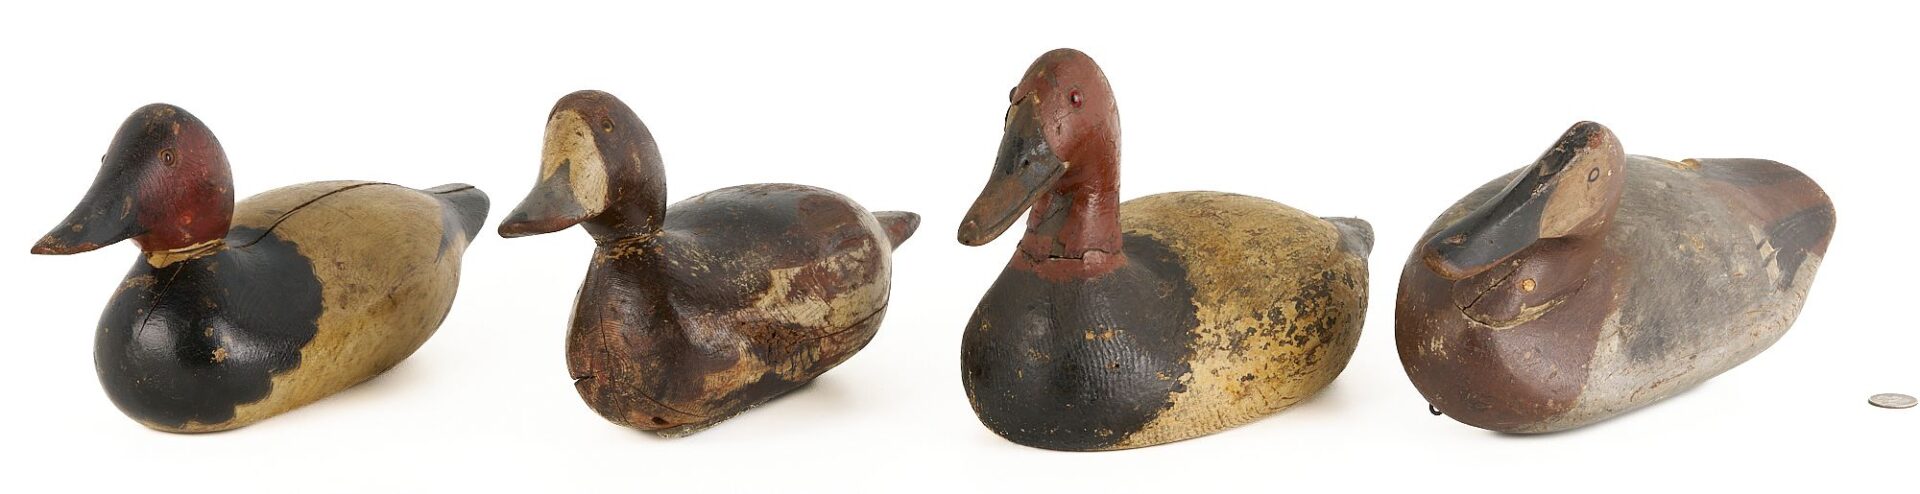 Lot 923: 4 Carved & Painted Duck Decoys, incl. Frank Resop